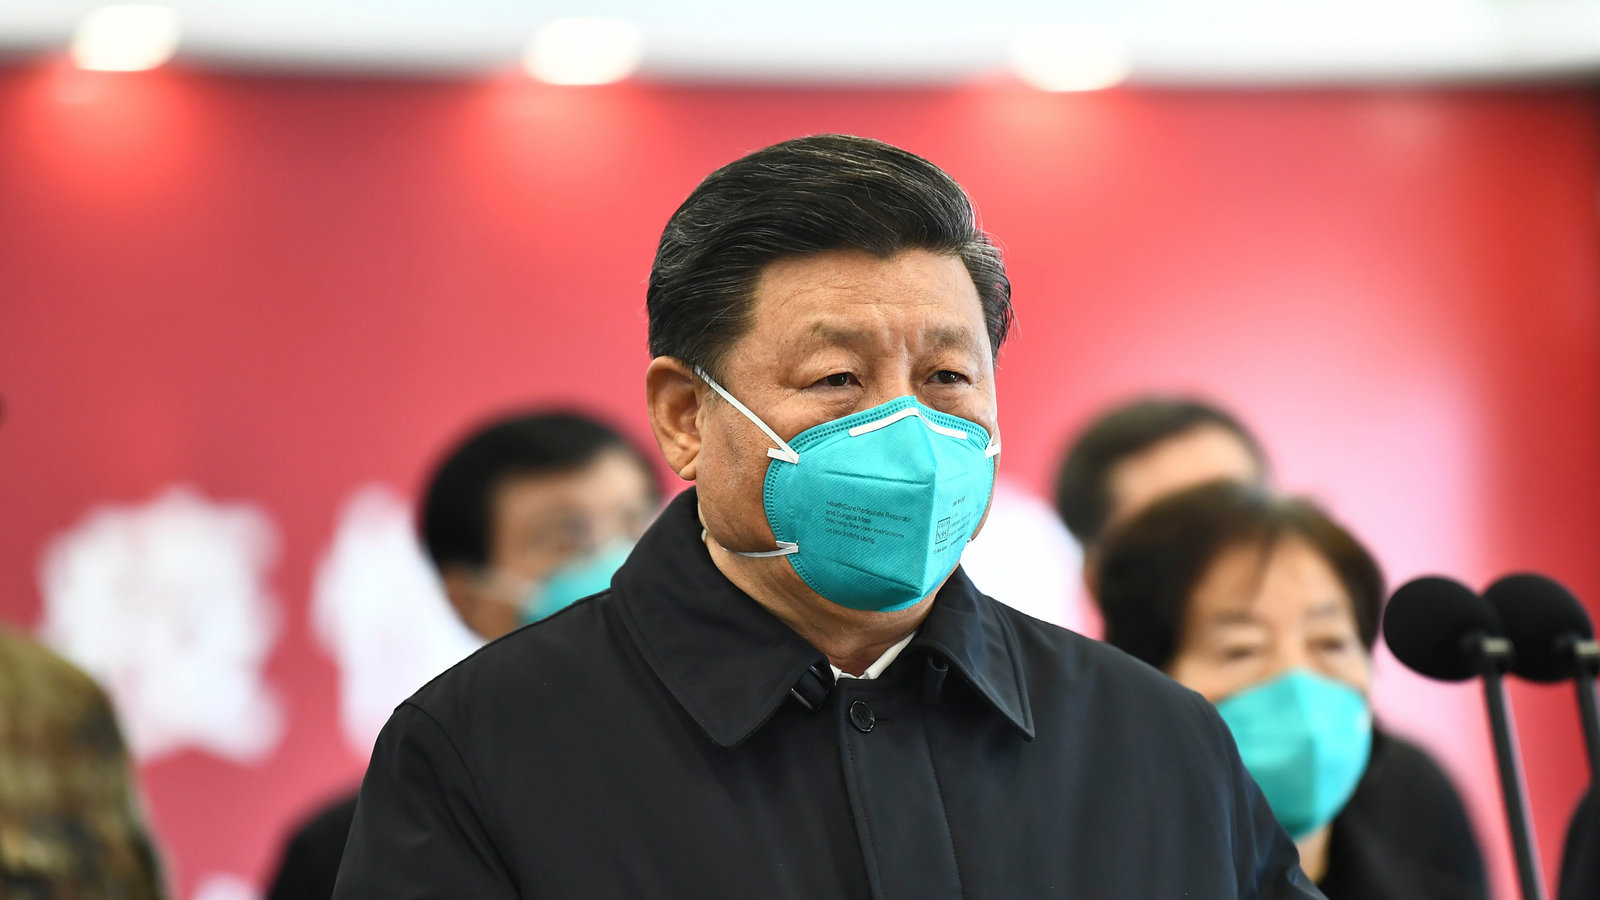 Xi Goes To Wuhan Coronavirus Epicenter In Show Of Confidence